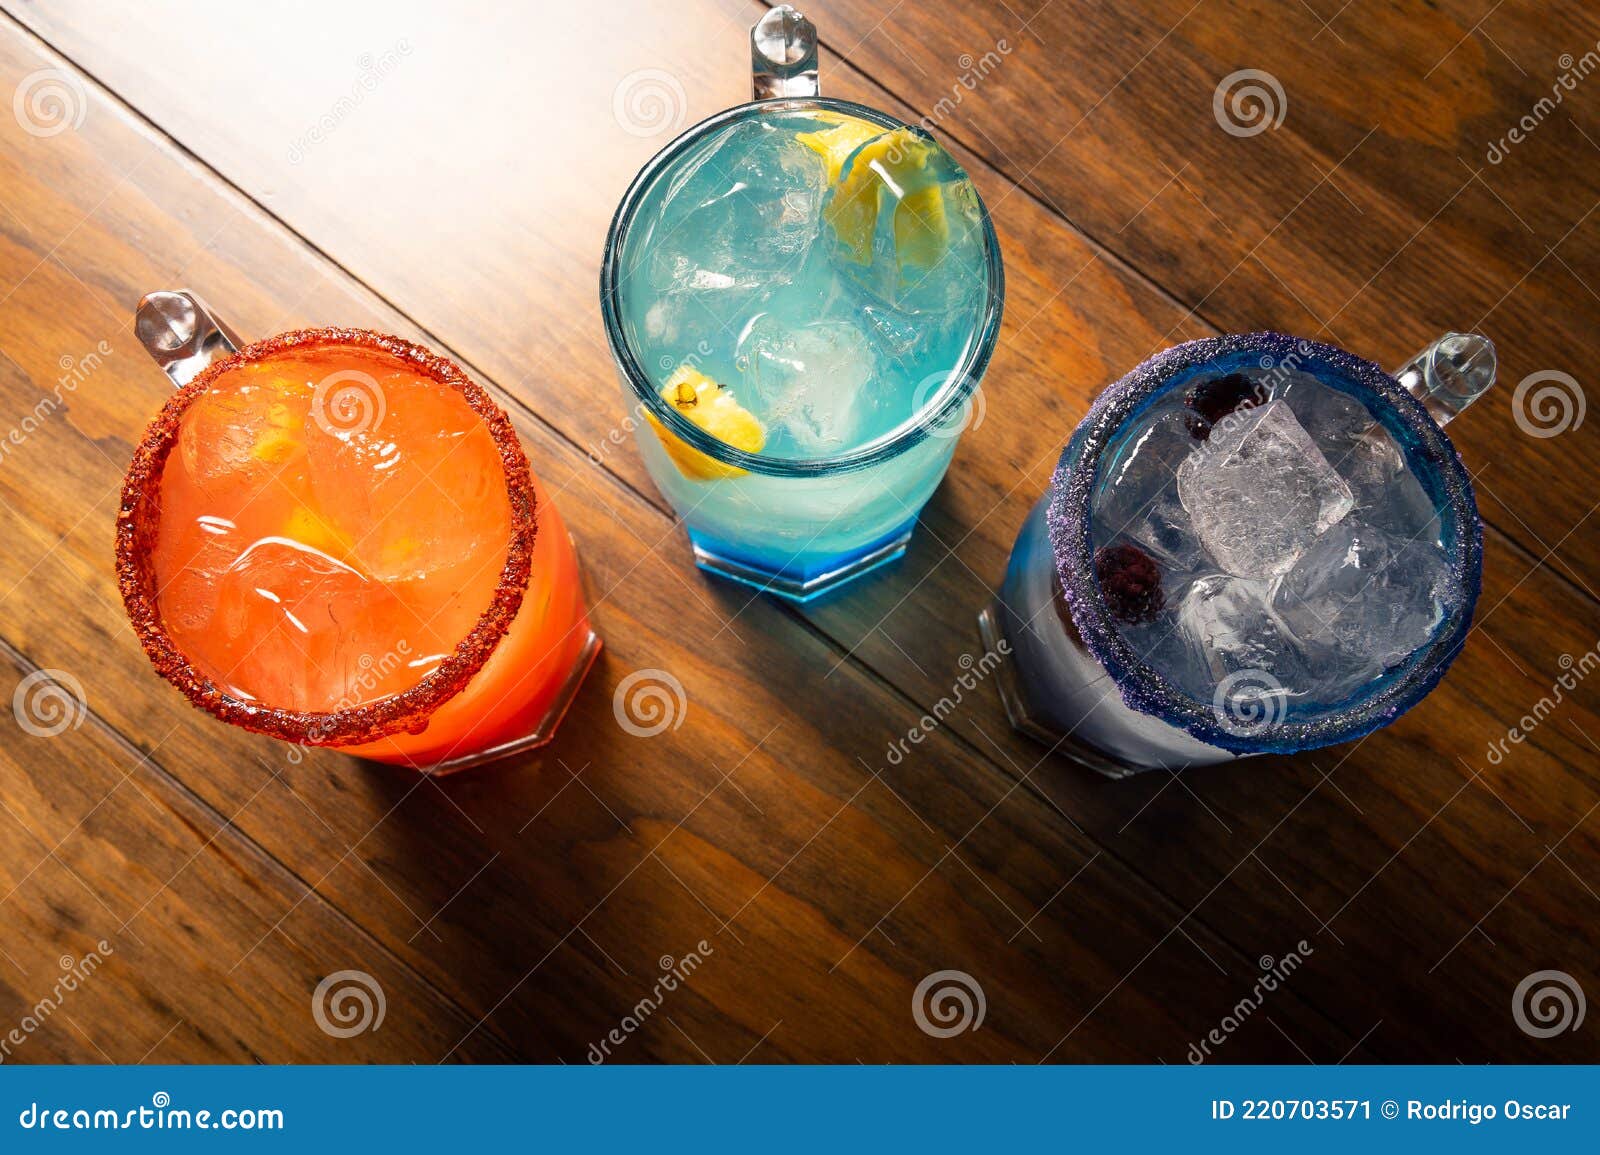 colorful toned cocktails on wooden background. frutal alcoholic cocktails. colorful drinks concept on wooden table